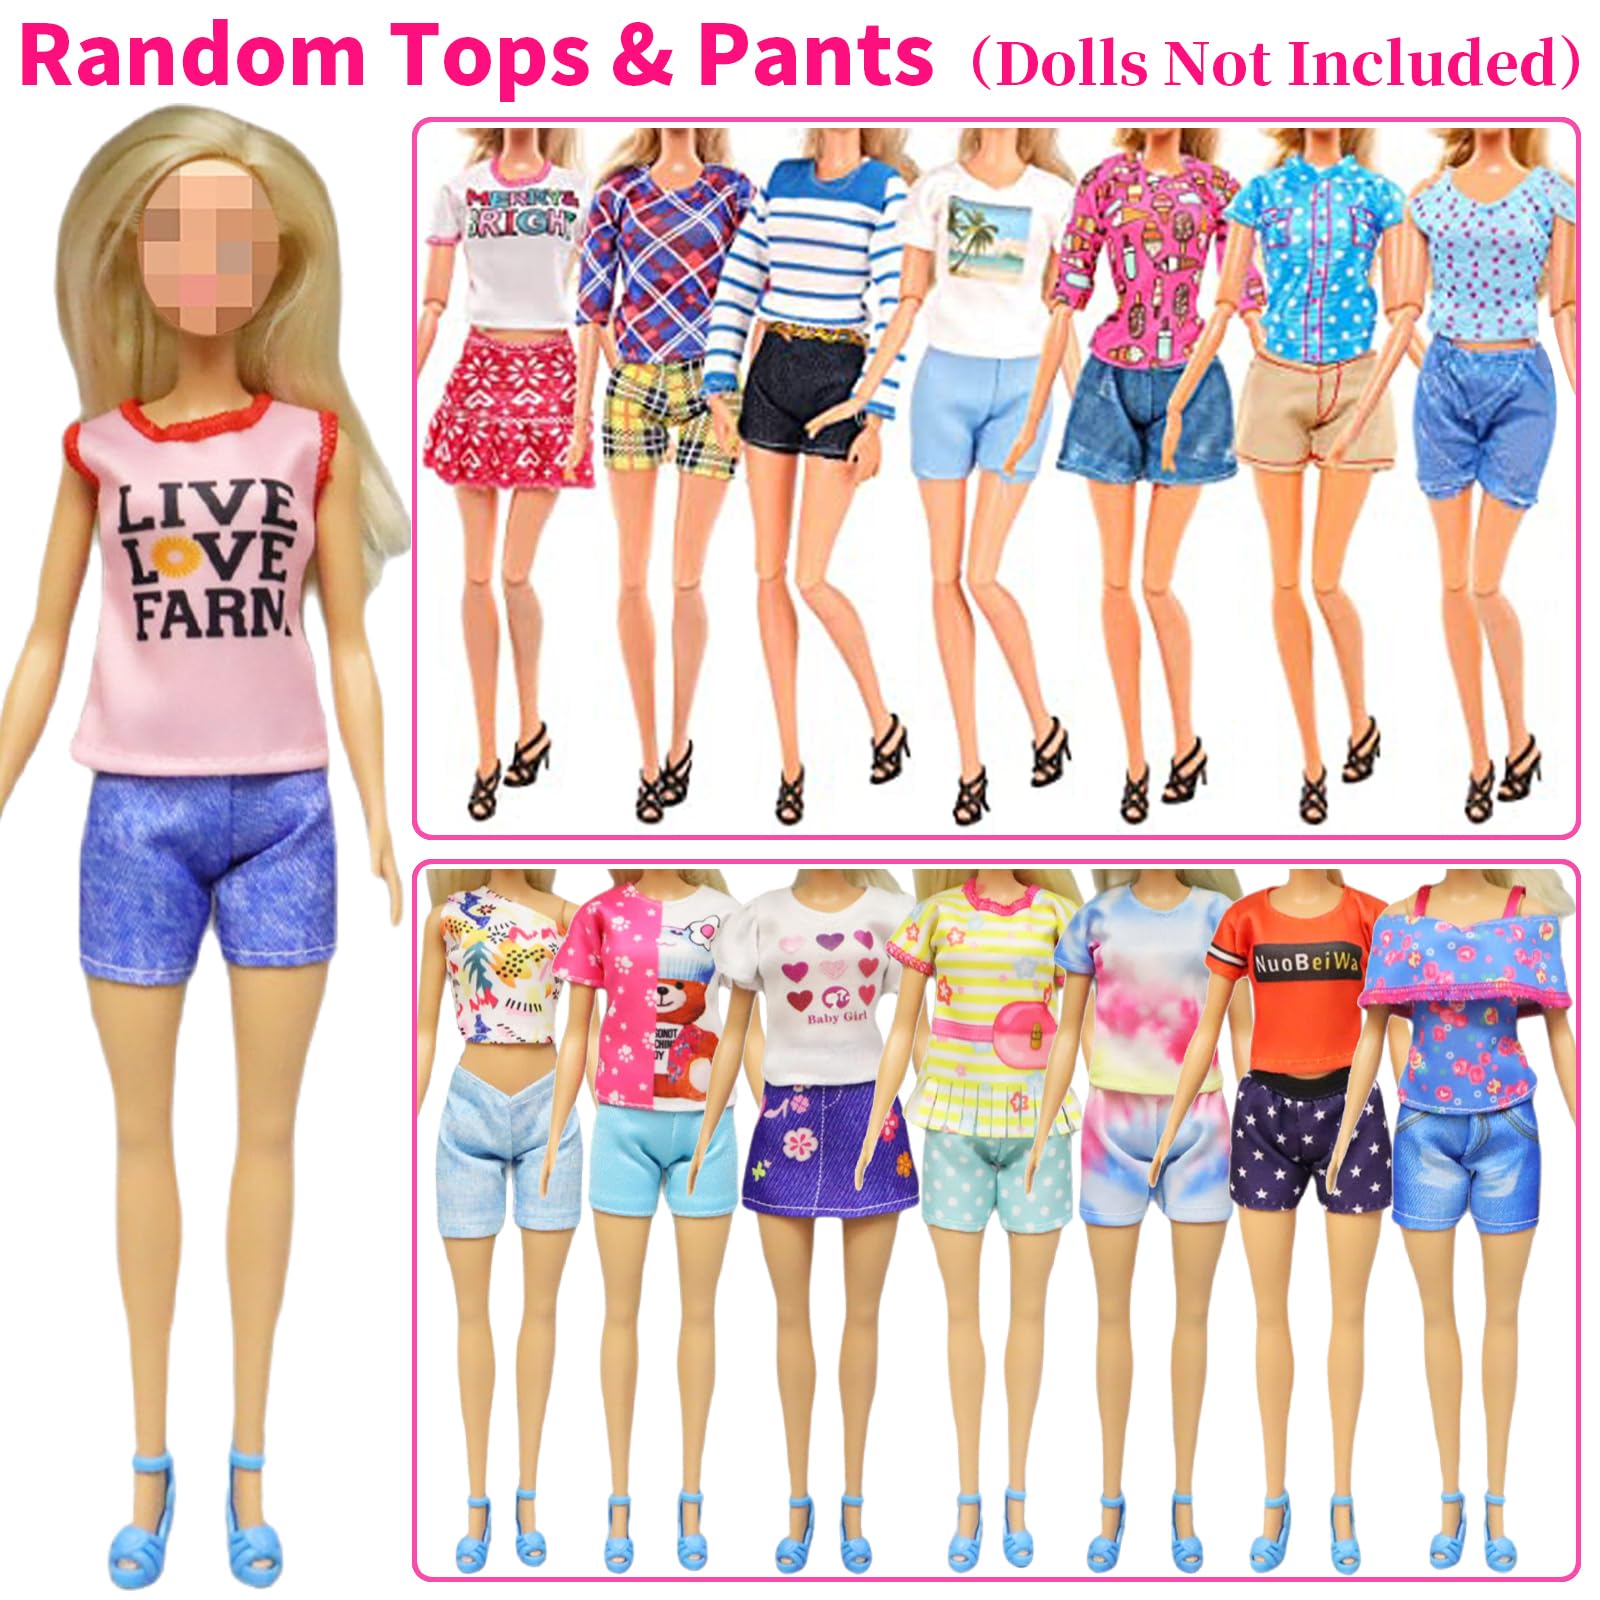 Ecore Fun 39 Pcs Doll Clothes and Accessories 3 Fashion Dresses 10 Slip Dresses 3 Tops 3 Pants 10 Necklaces 10 Shoes Fashion Casual Outfits Perfect for 11.5 inch Dolls